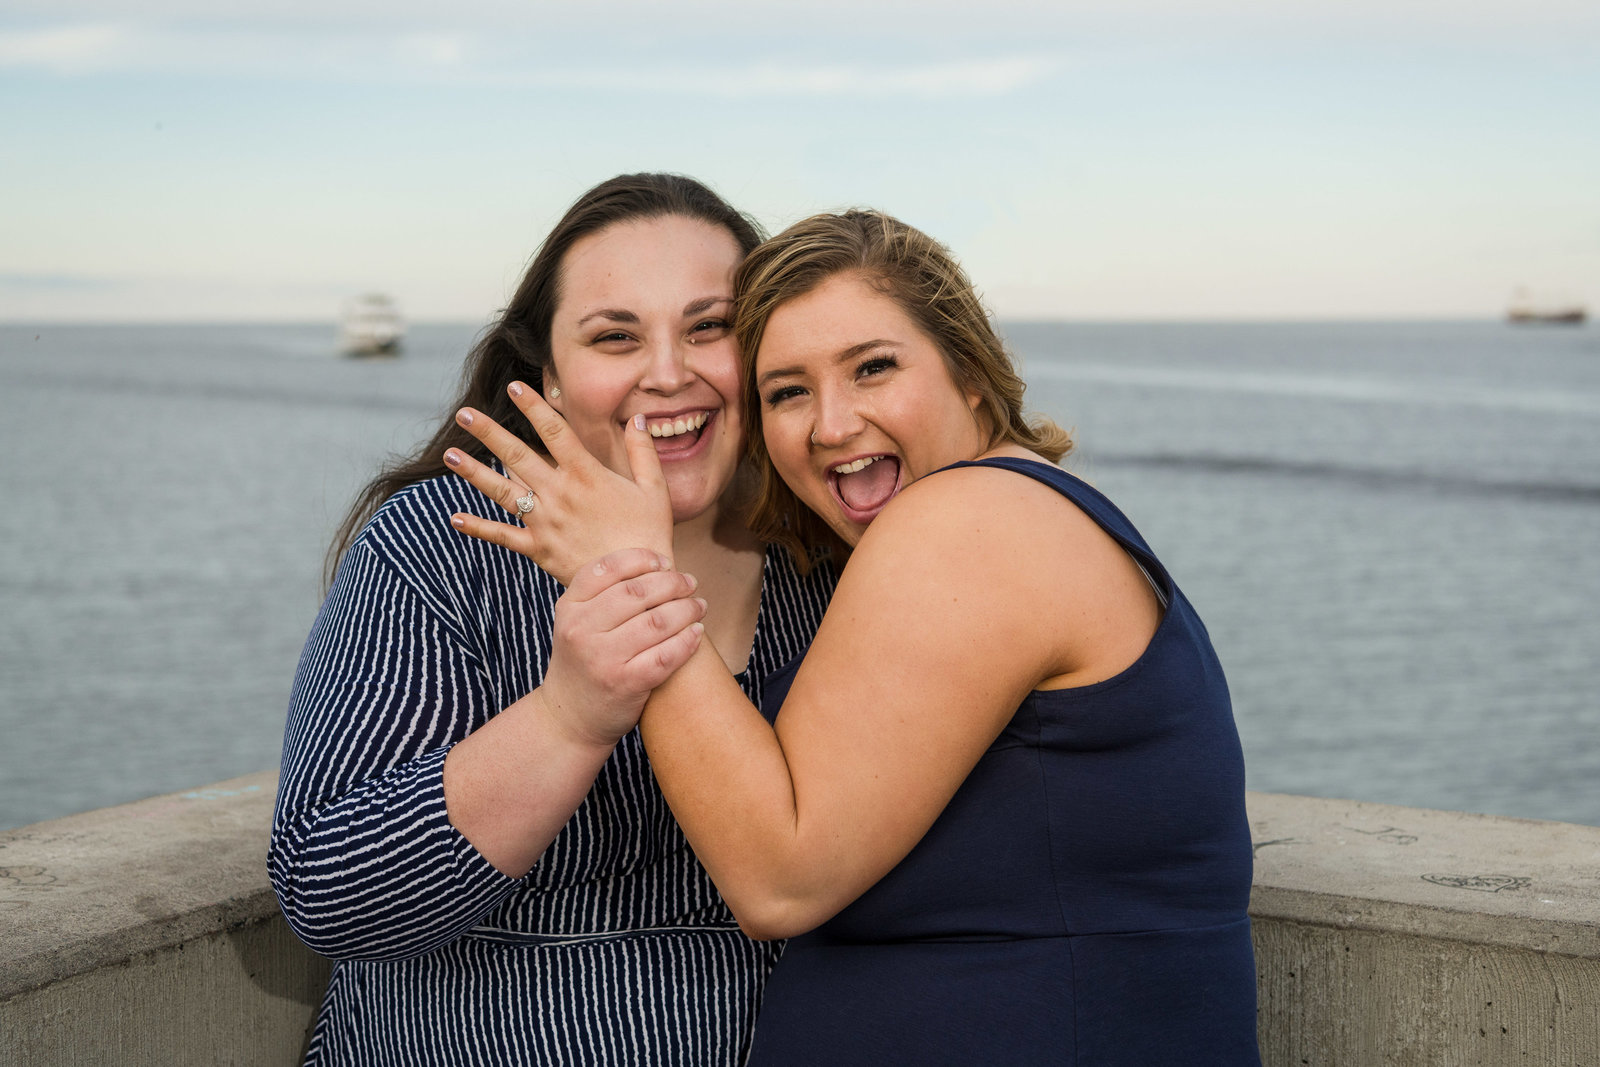 Lesbian couple show off engagement ring